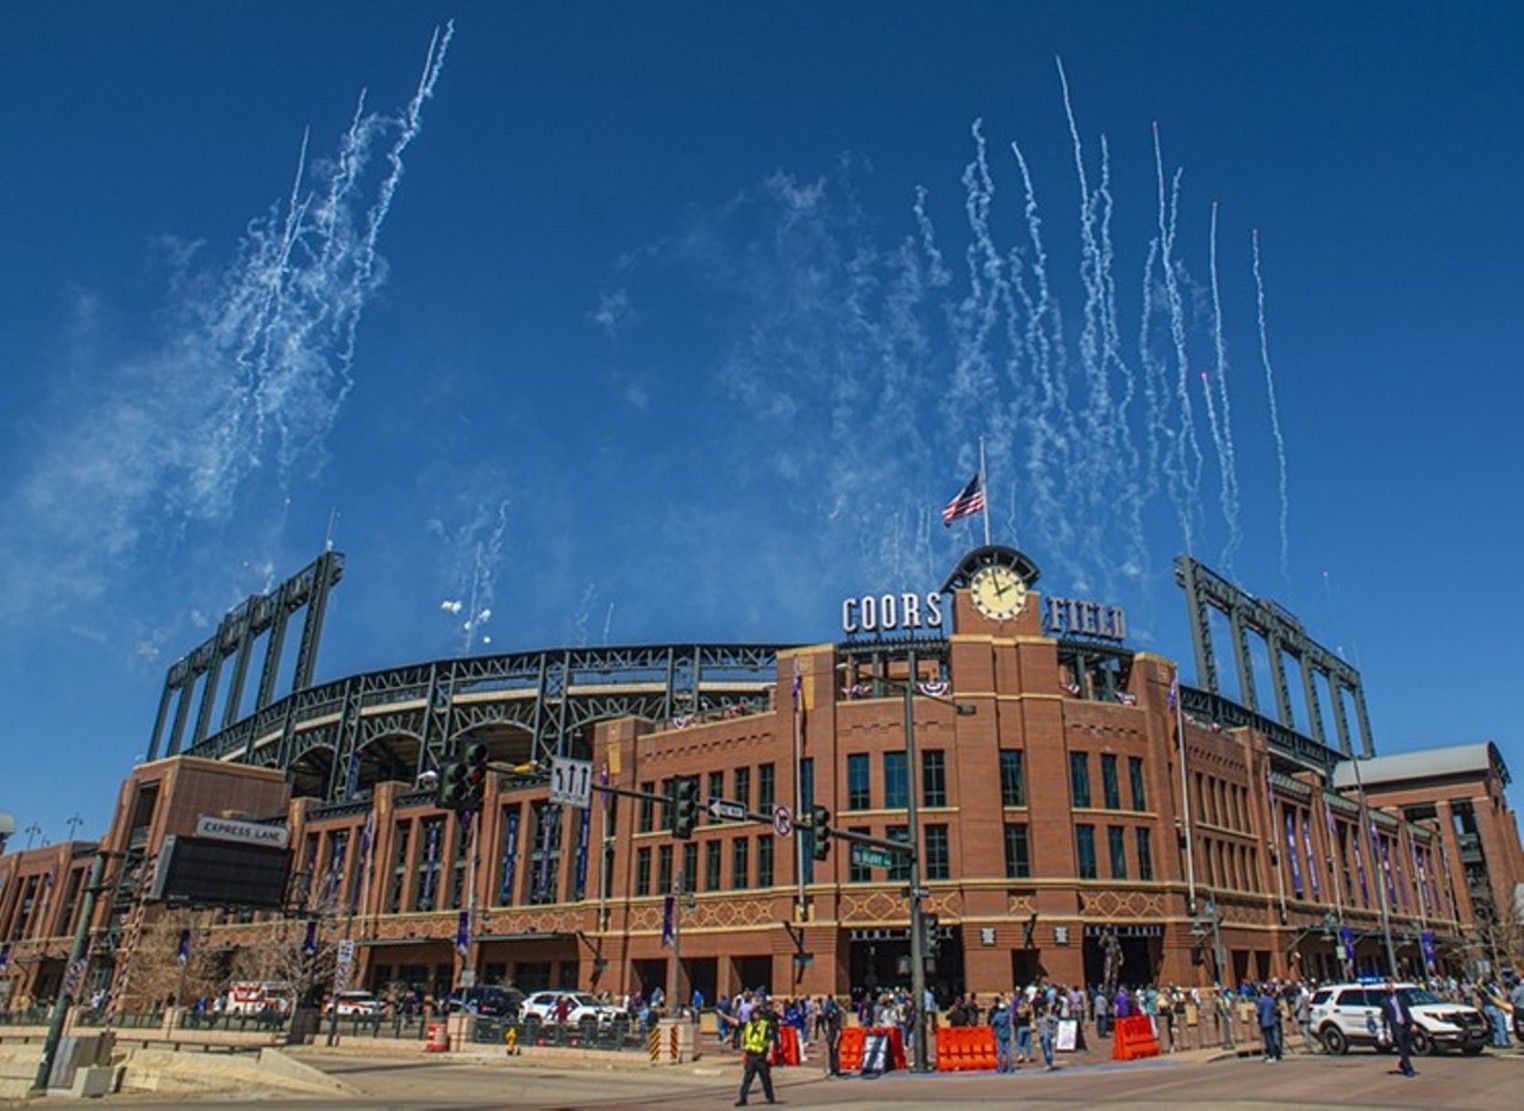 Colorado Rockies: The 5 best things to eat at Coors Field